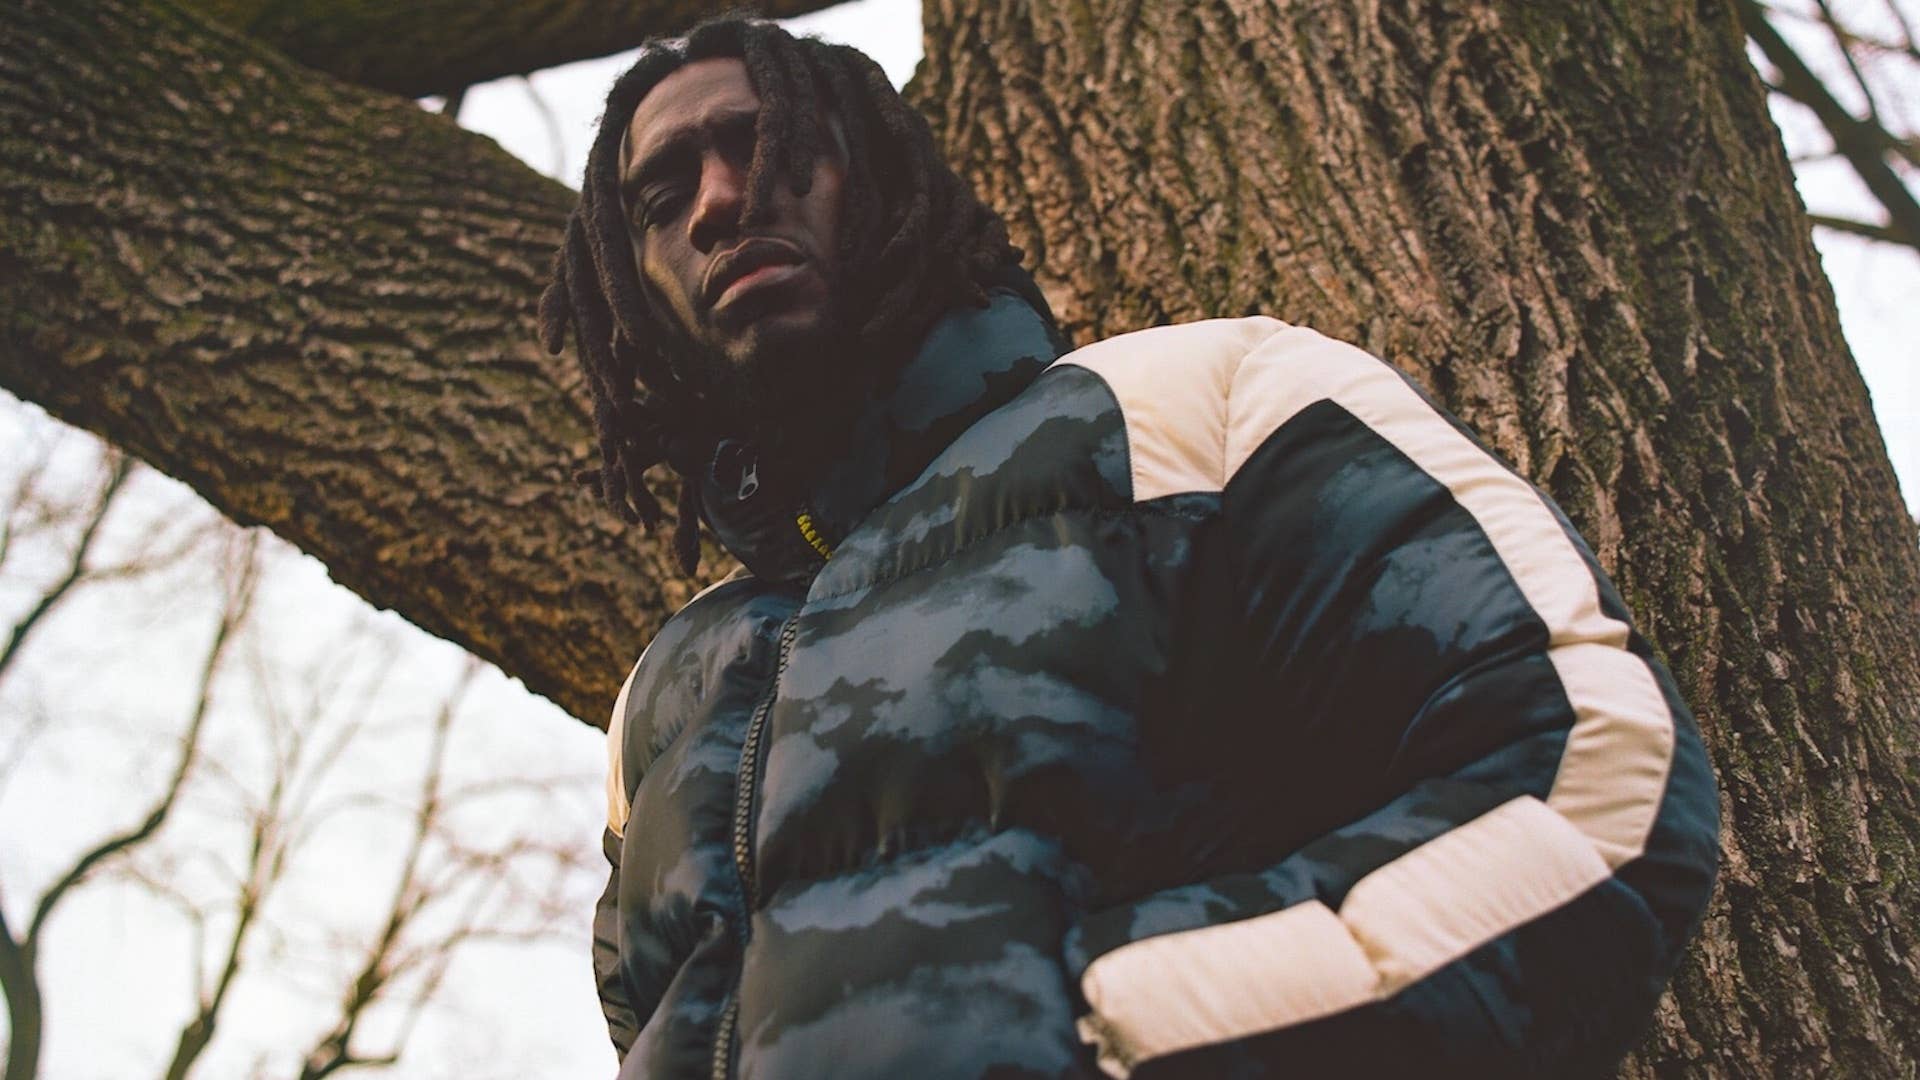 Dreamville Shares New Apparel Collection Featuring Puffer Jacket